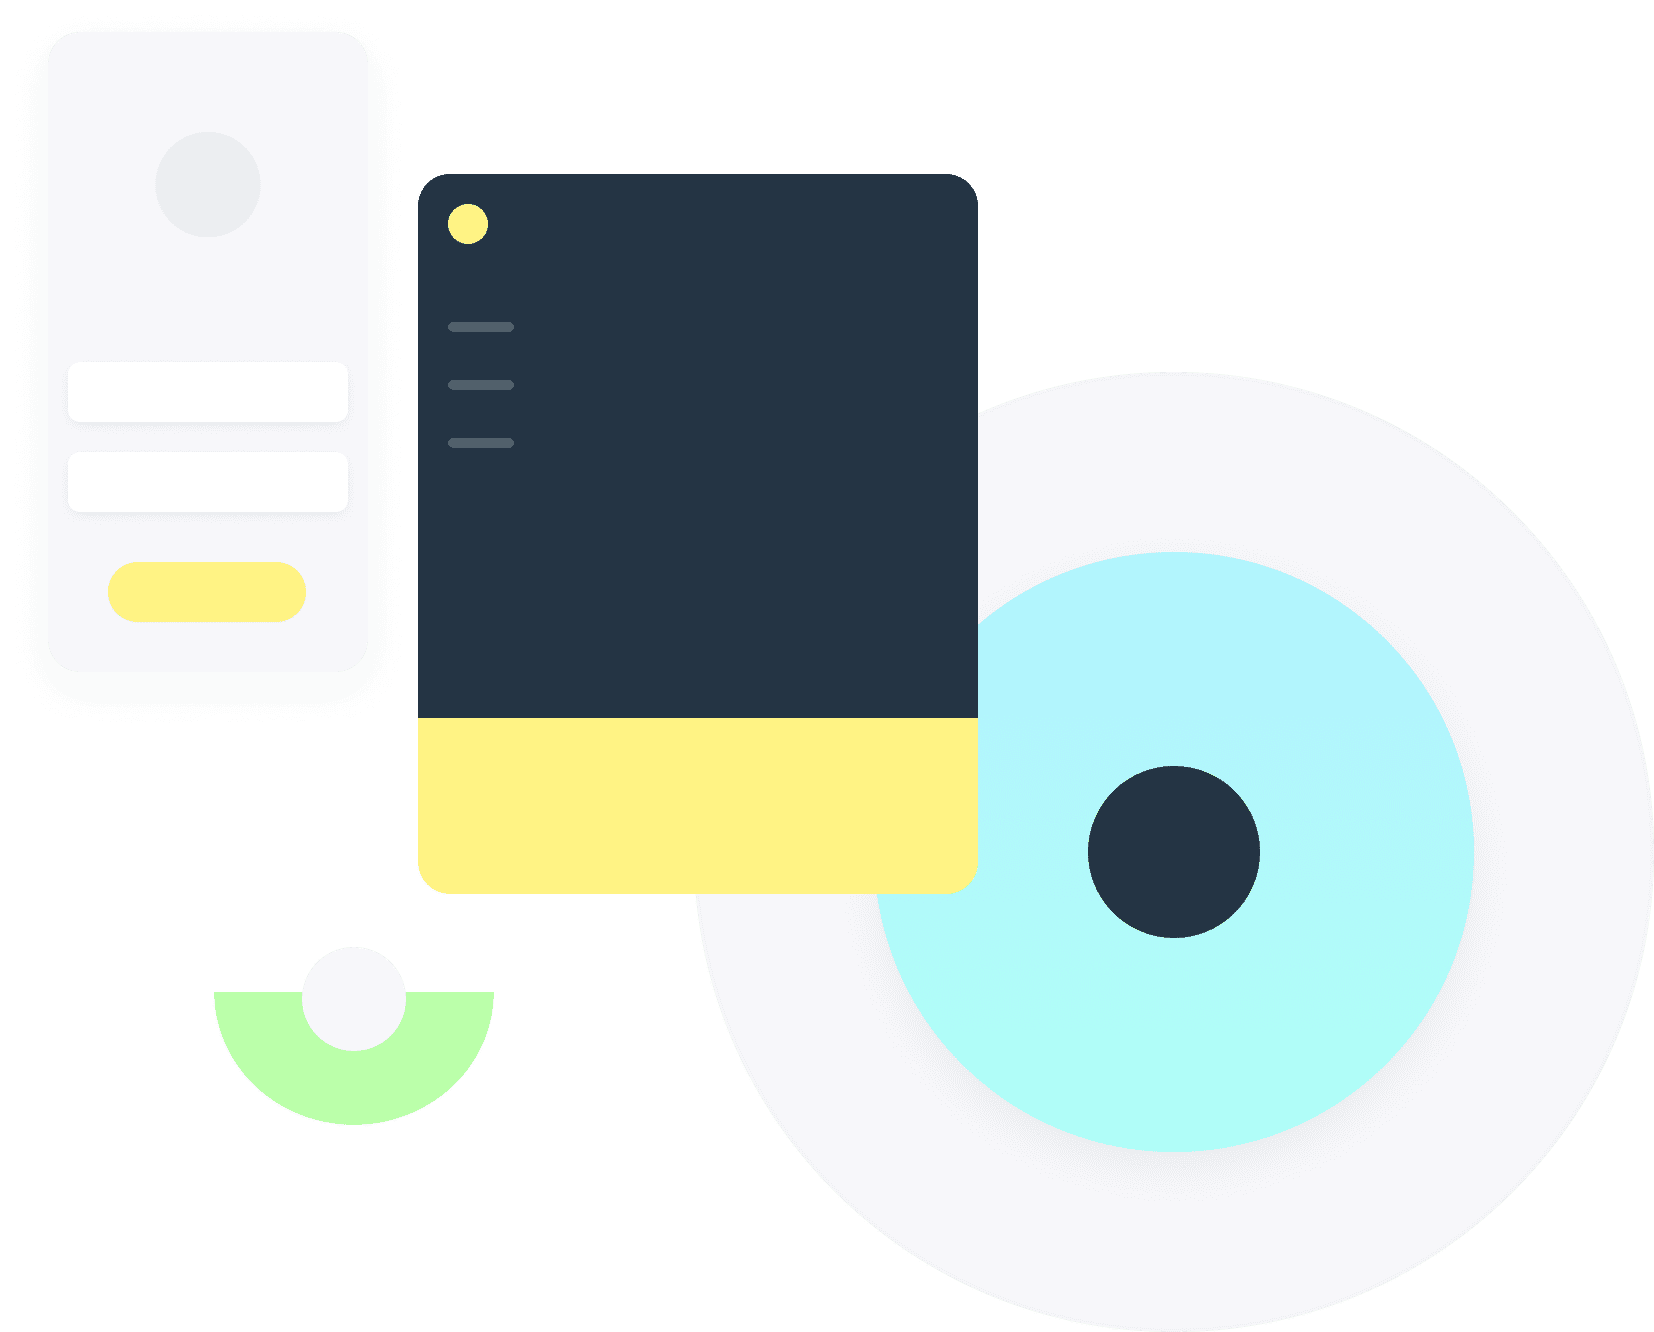 Design Resources, UI Kits, Icons, Websites, and More